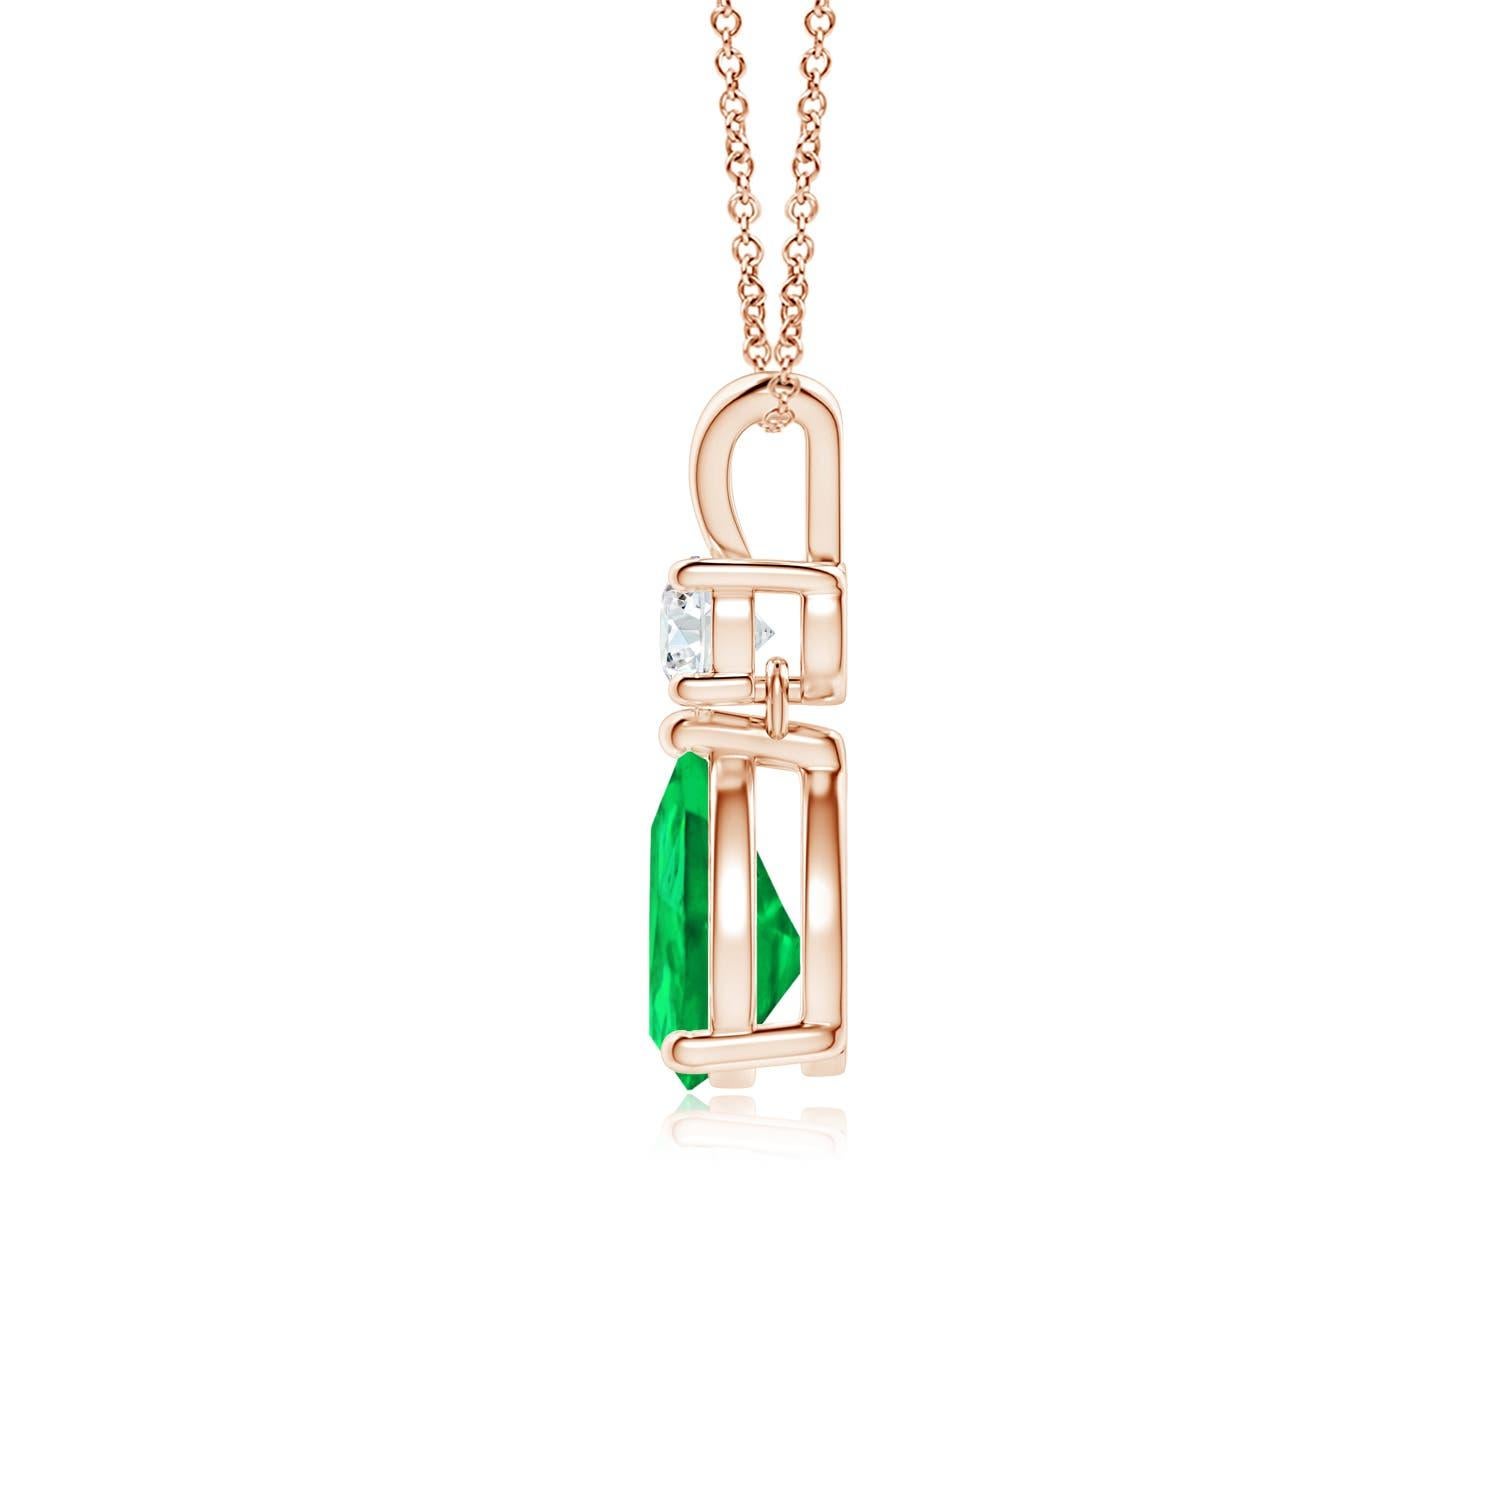 A vivid green pear cut emerald dangles from a sparkling white diamond on this elegant drop pendant. The lustrous V bale adds beauty to this 14k rose gold emerald and diamond pendant. It exudes luxurious charm with its remarkable long drop